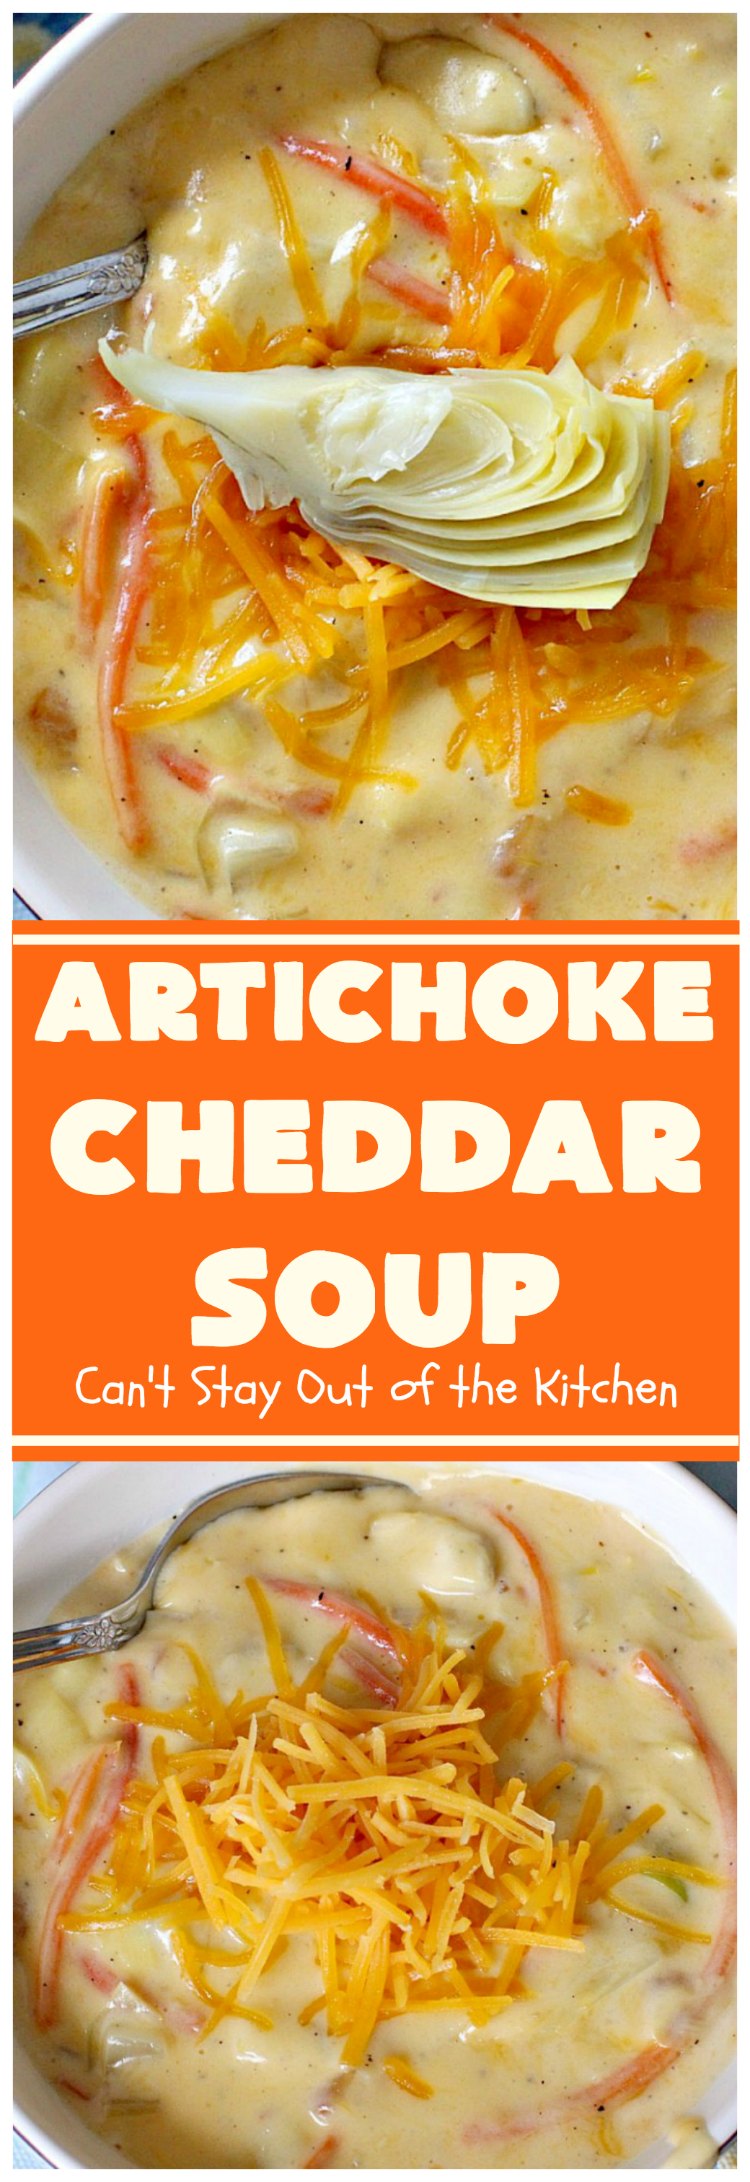 Artichoke Cheddar Soup | Can't Stay Out of the Kitchen